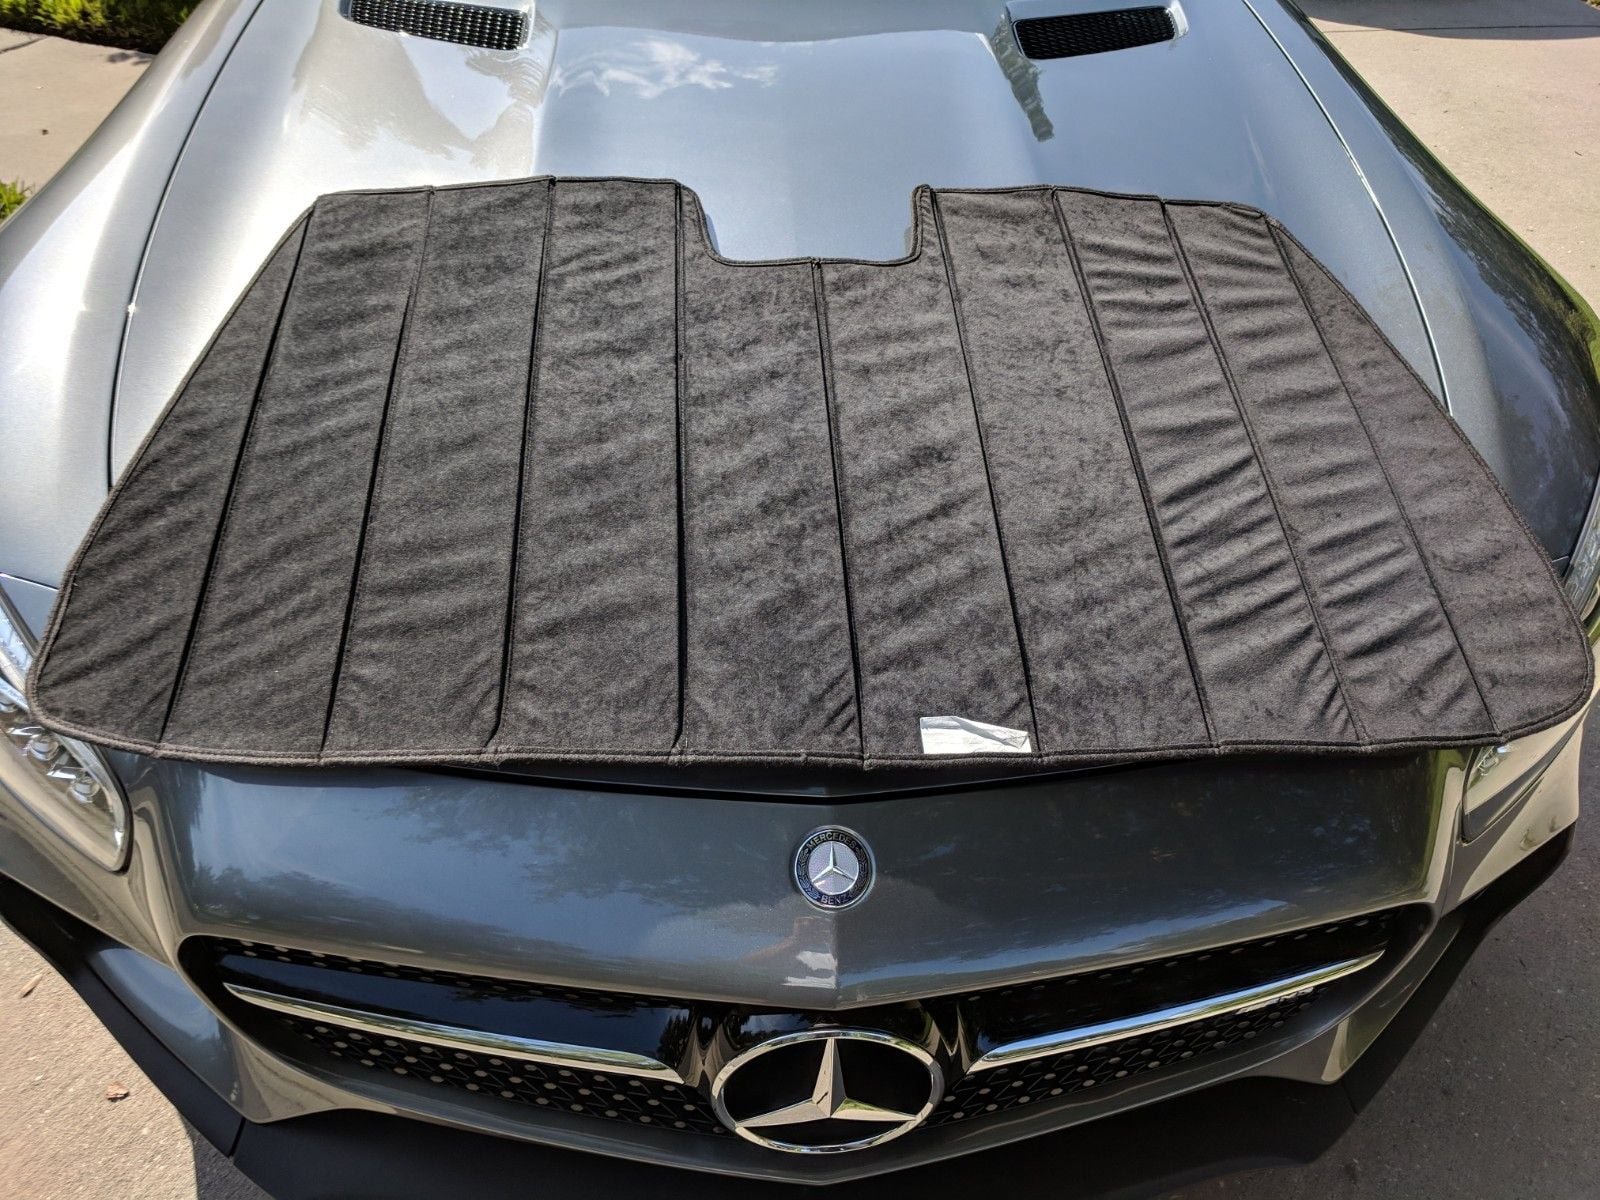 Accessories - C450/C43 Sun Shade (OEM) - Used - 2017 to 2019 Mercedes-Benz C43 AMG - 2016 Mercedes-Benz C450 AMG - Tampa, FL 33556, United States